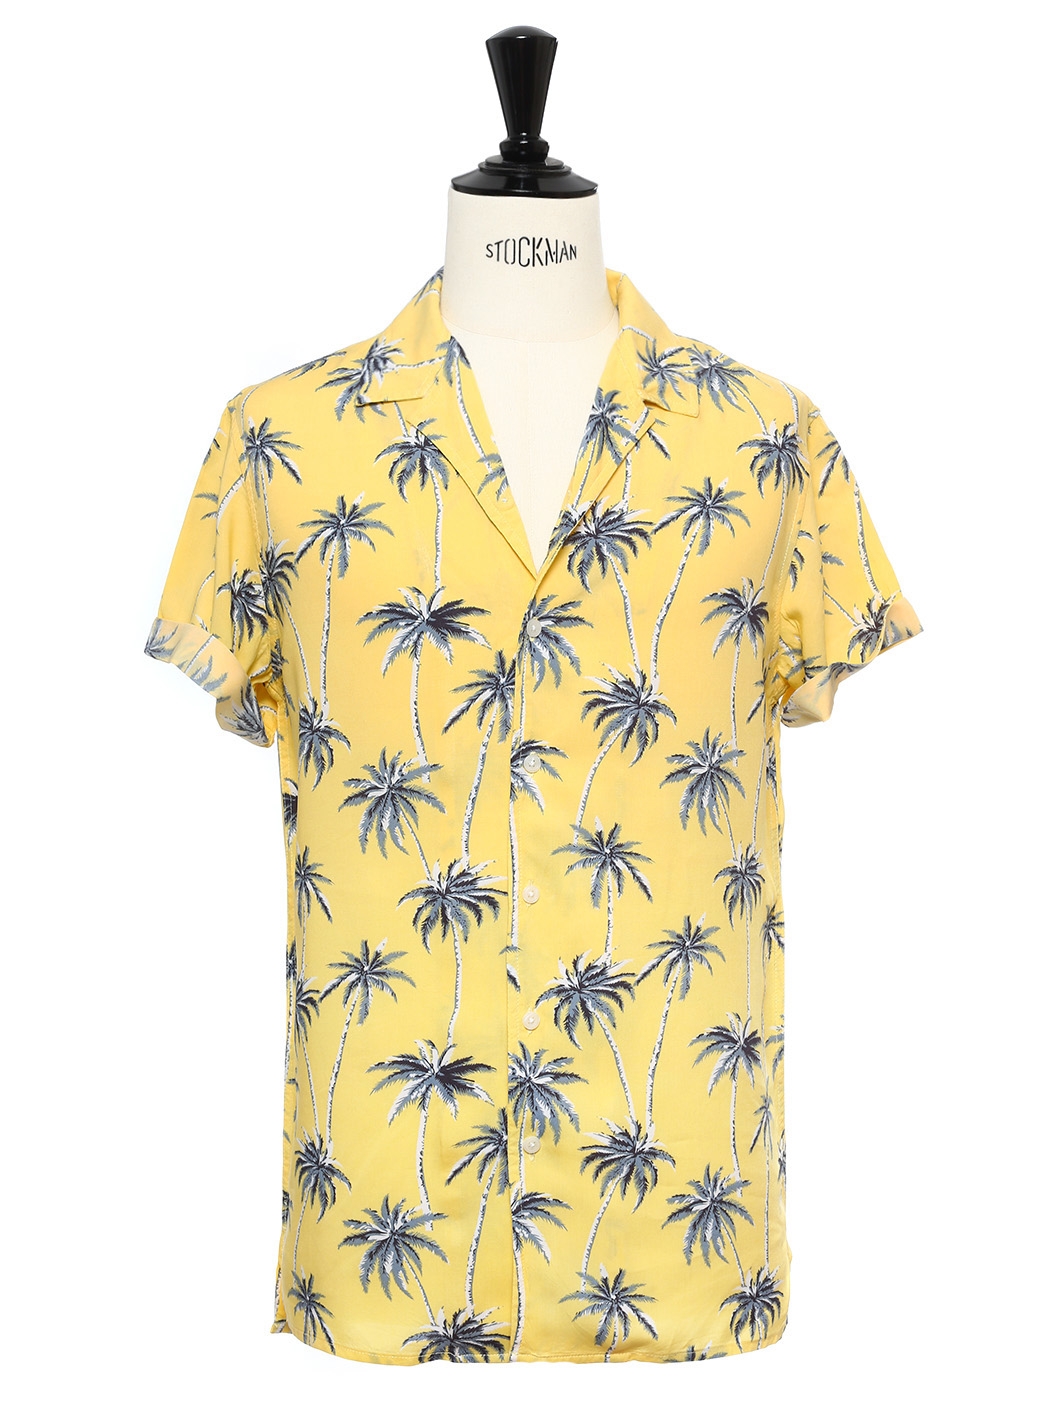 Boutique Yellow cotton printed with blue palm trees short sleeved